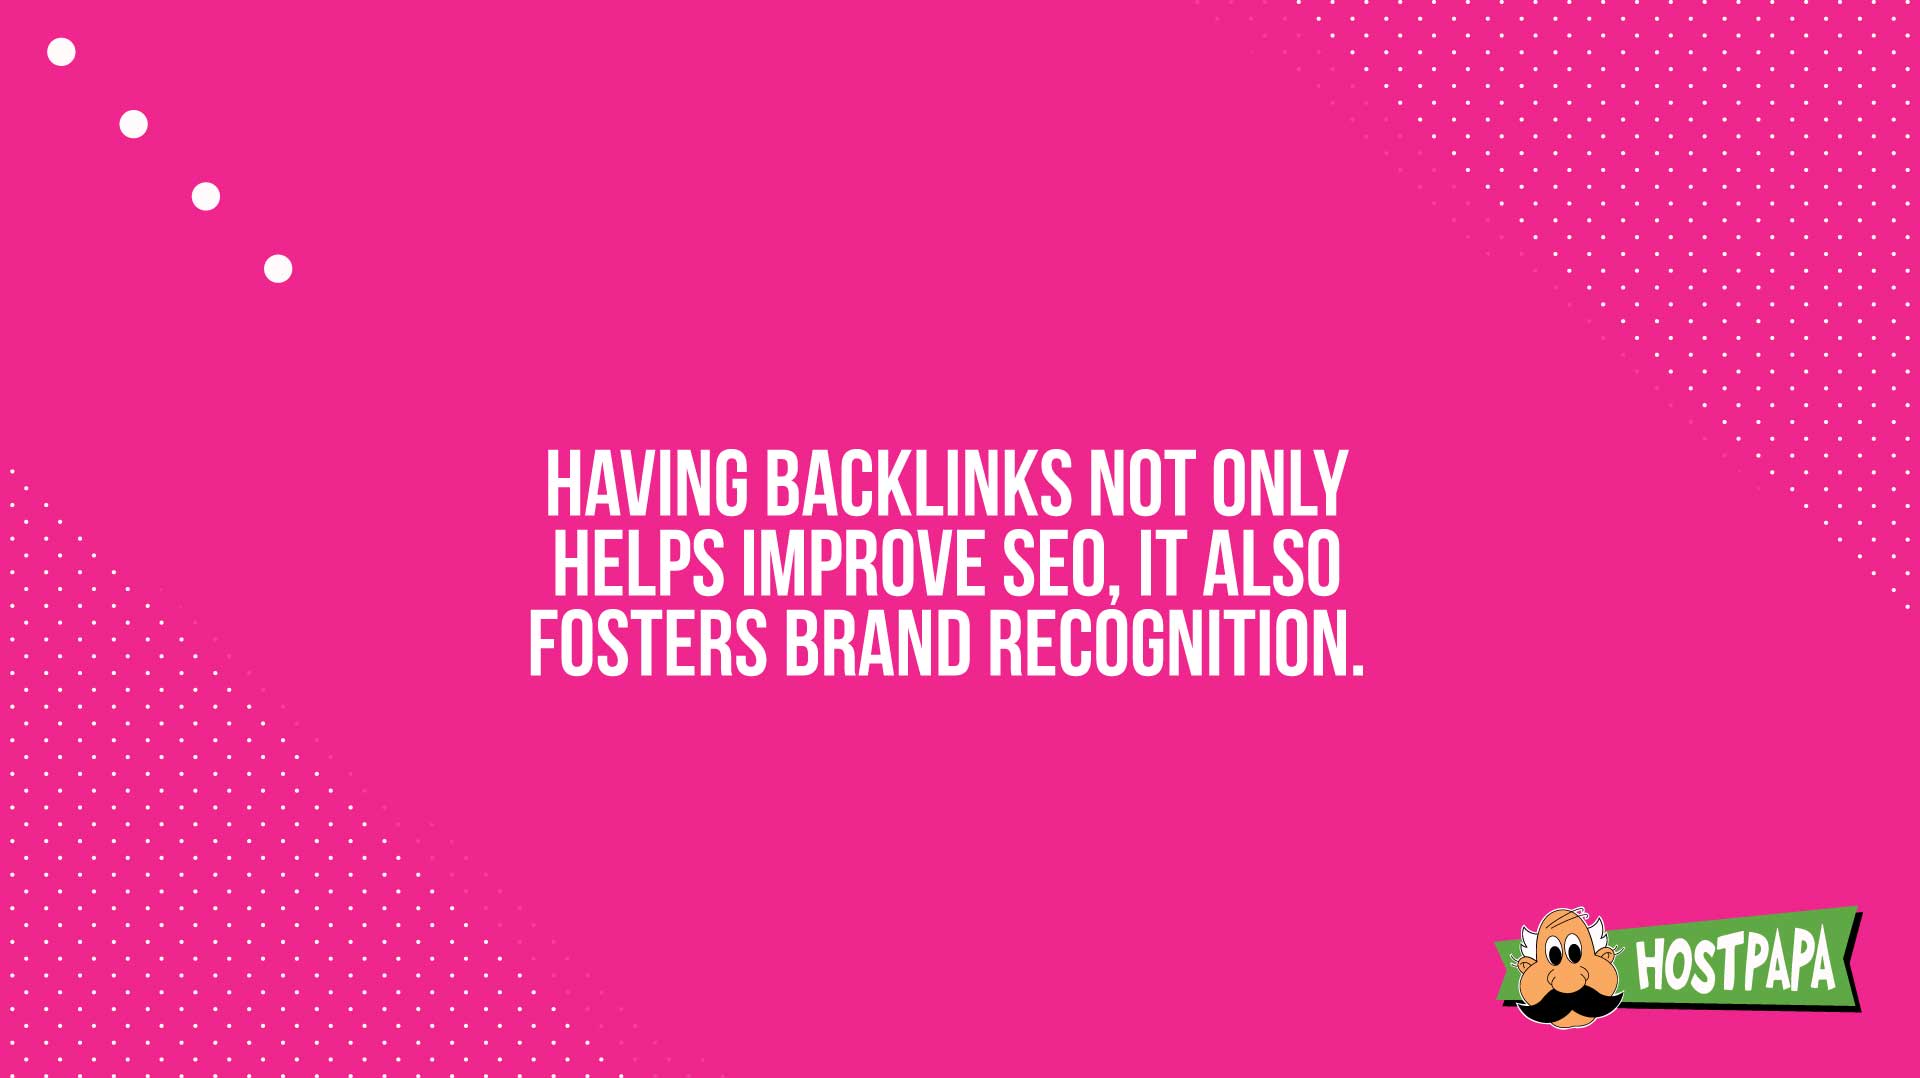 Having blacklinks not only helps improve SEO, it also fosters brand recognition